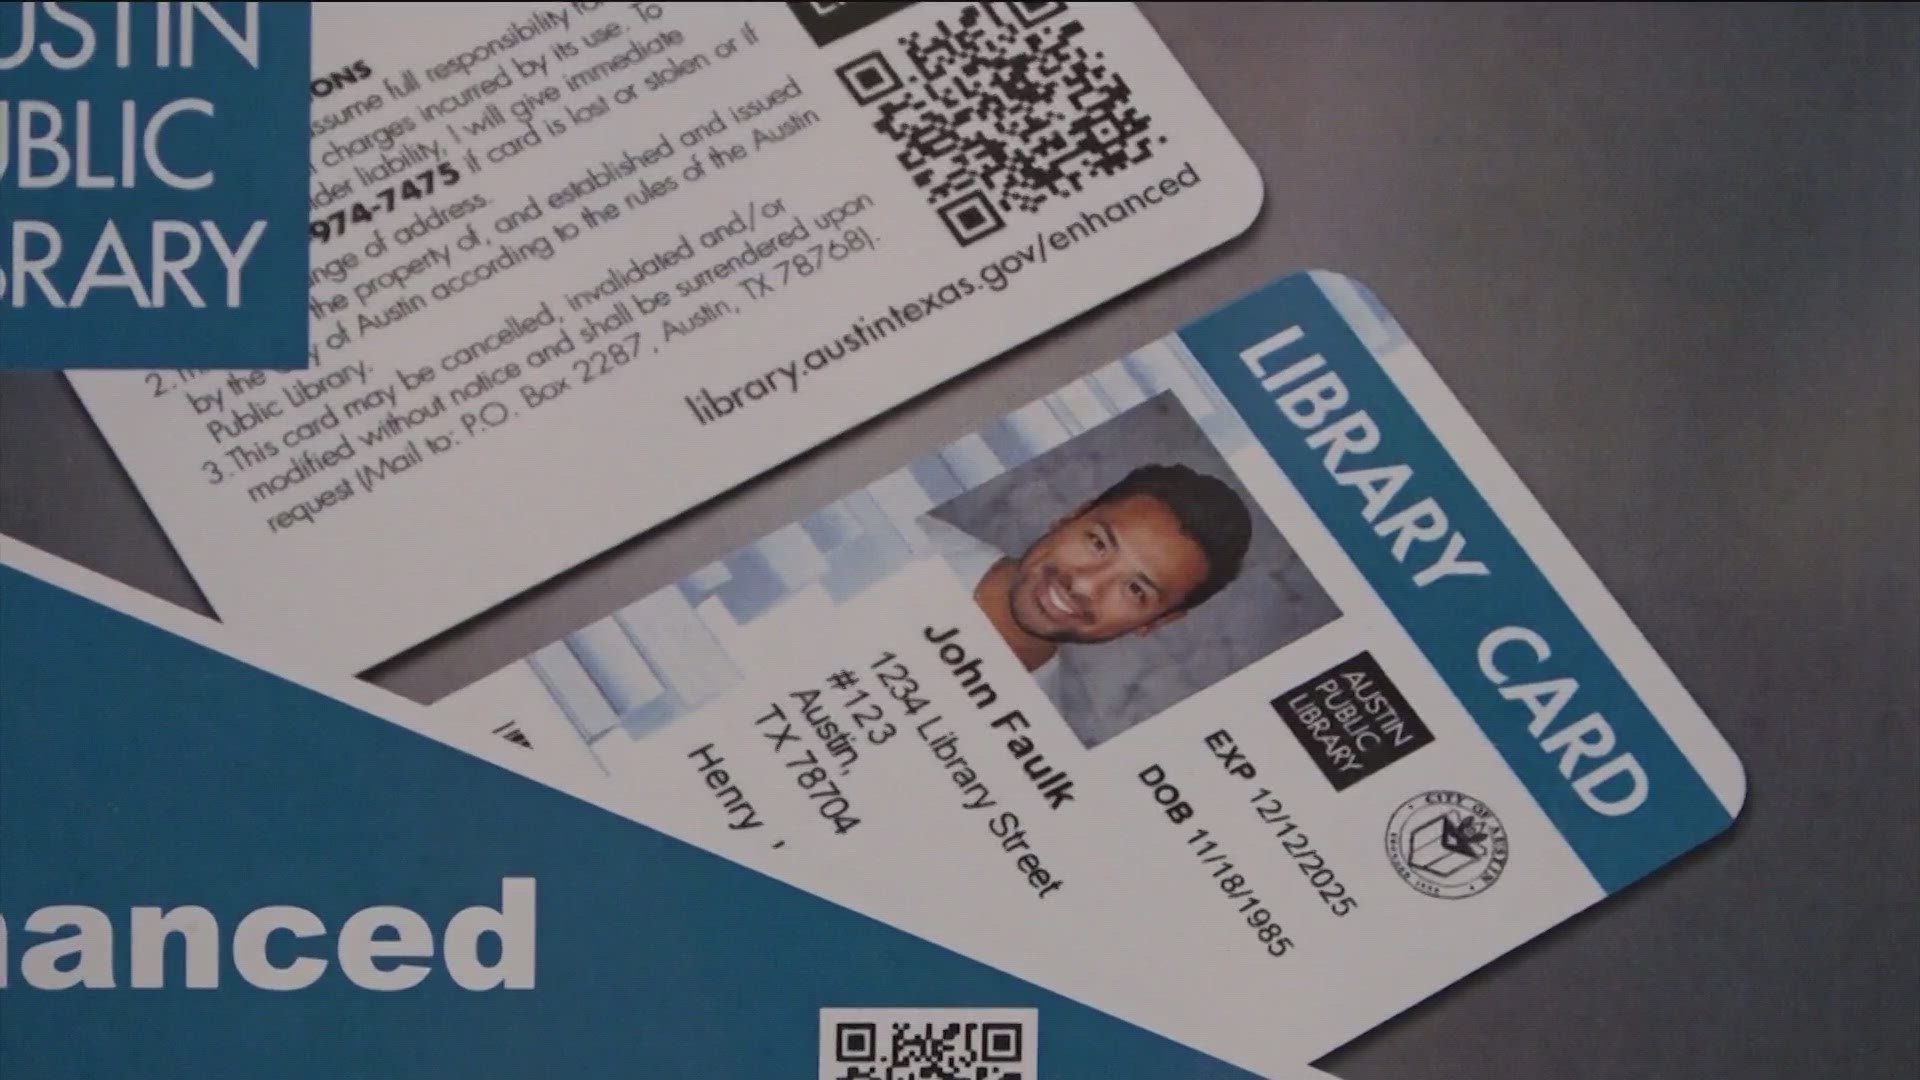 It's been about a month since the launch of the Austin Public Library's new enhanced library cards.